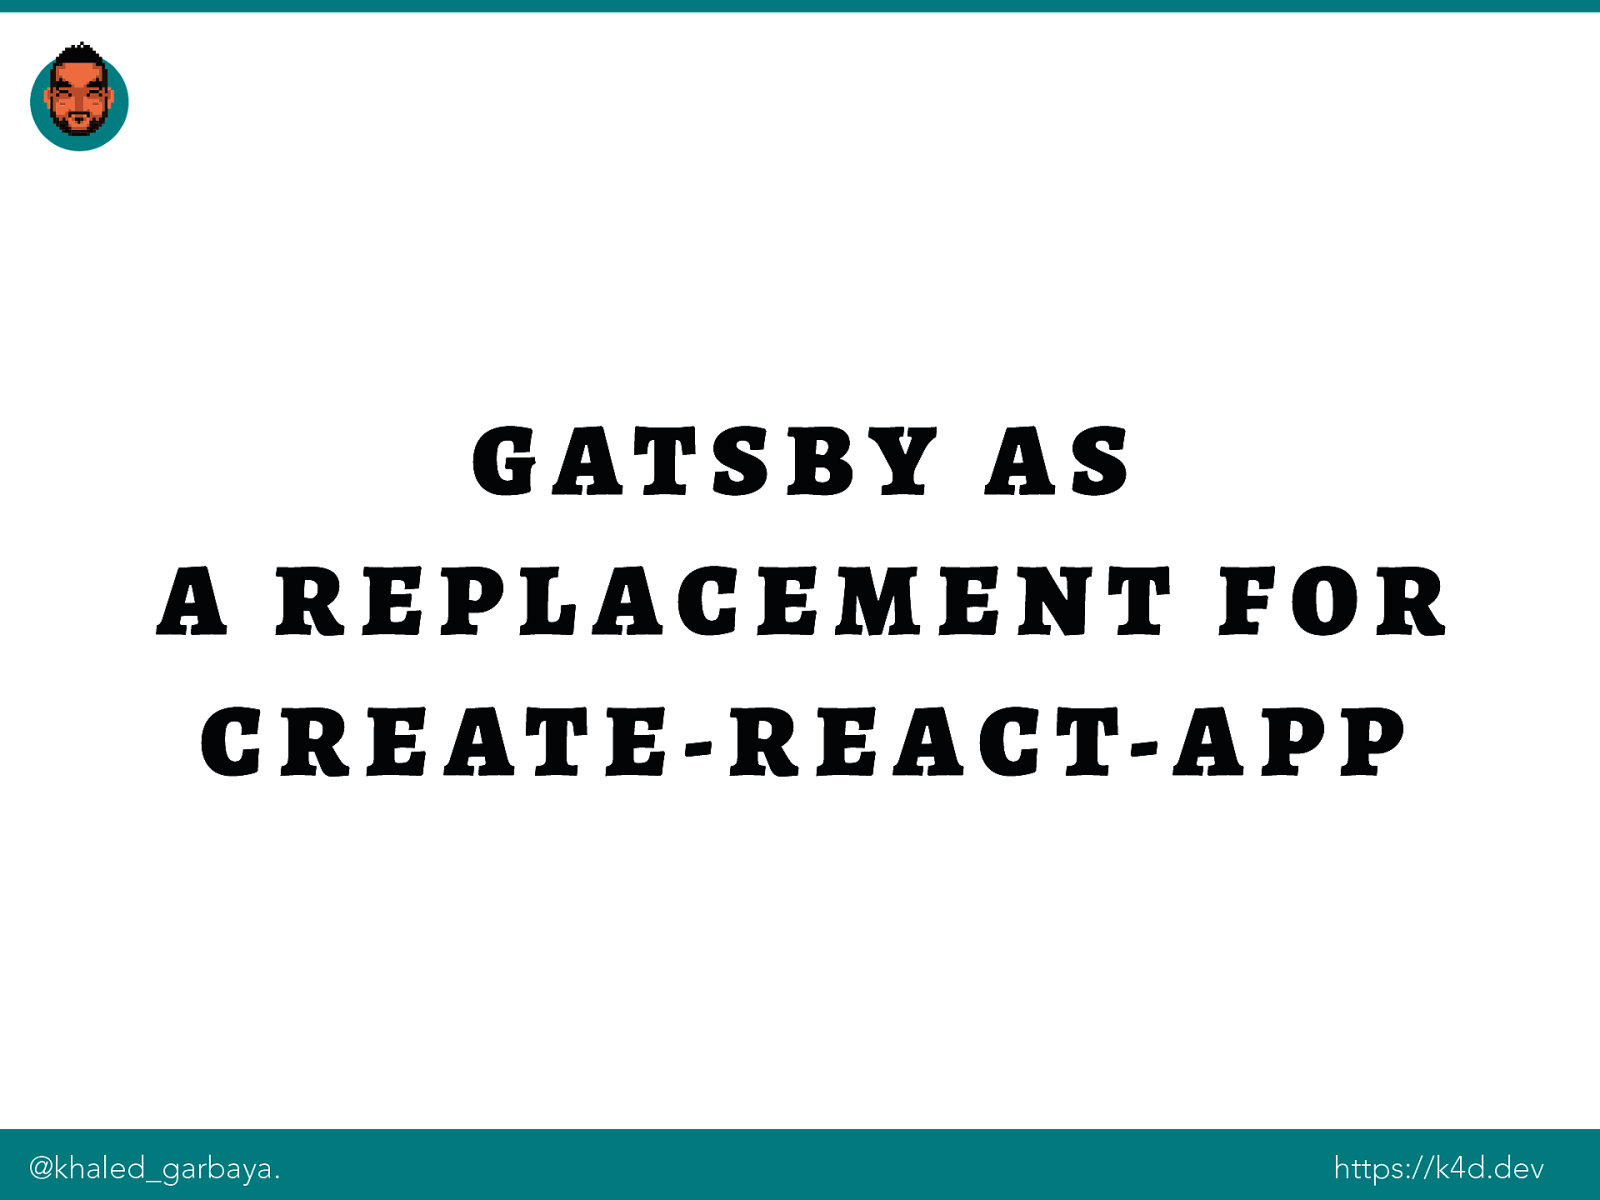 Gatsby as a replacement fro create-react-app